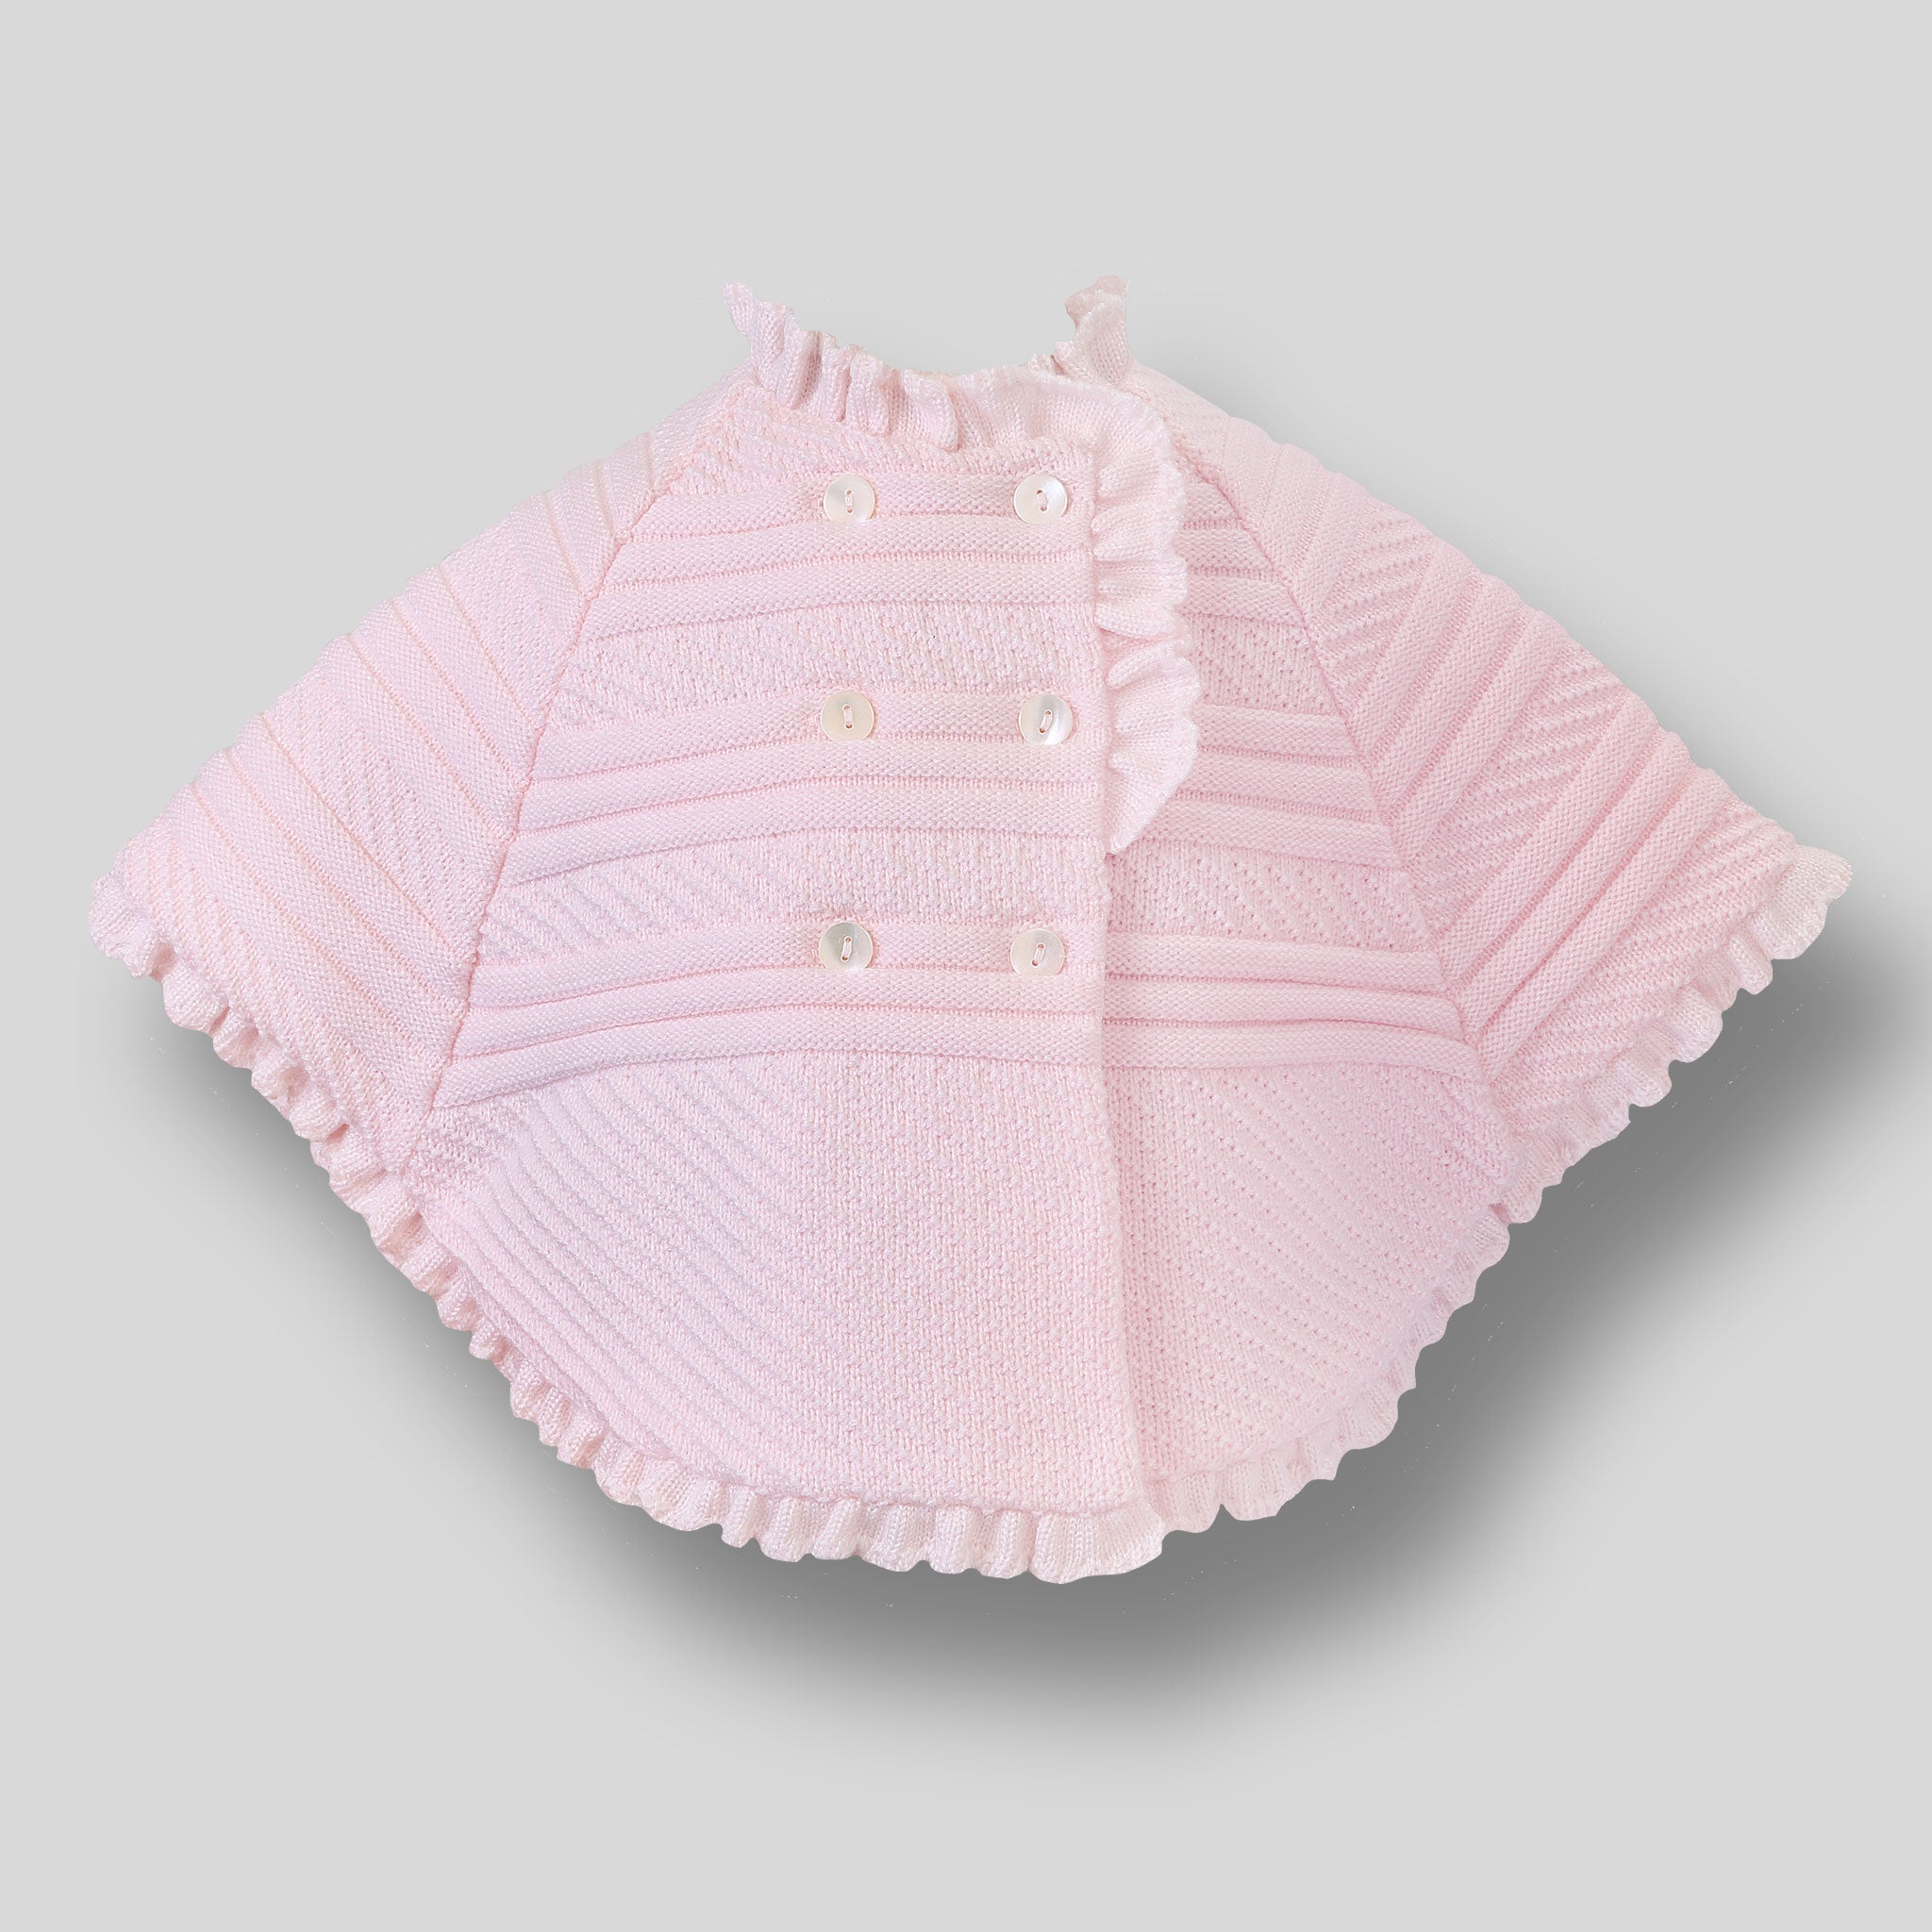 sarah louise pink knitted poncho cape